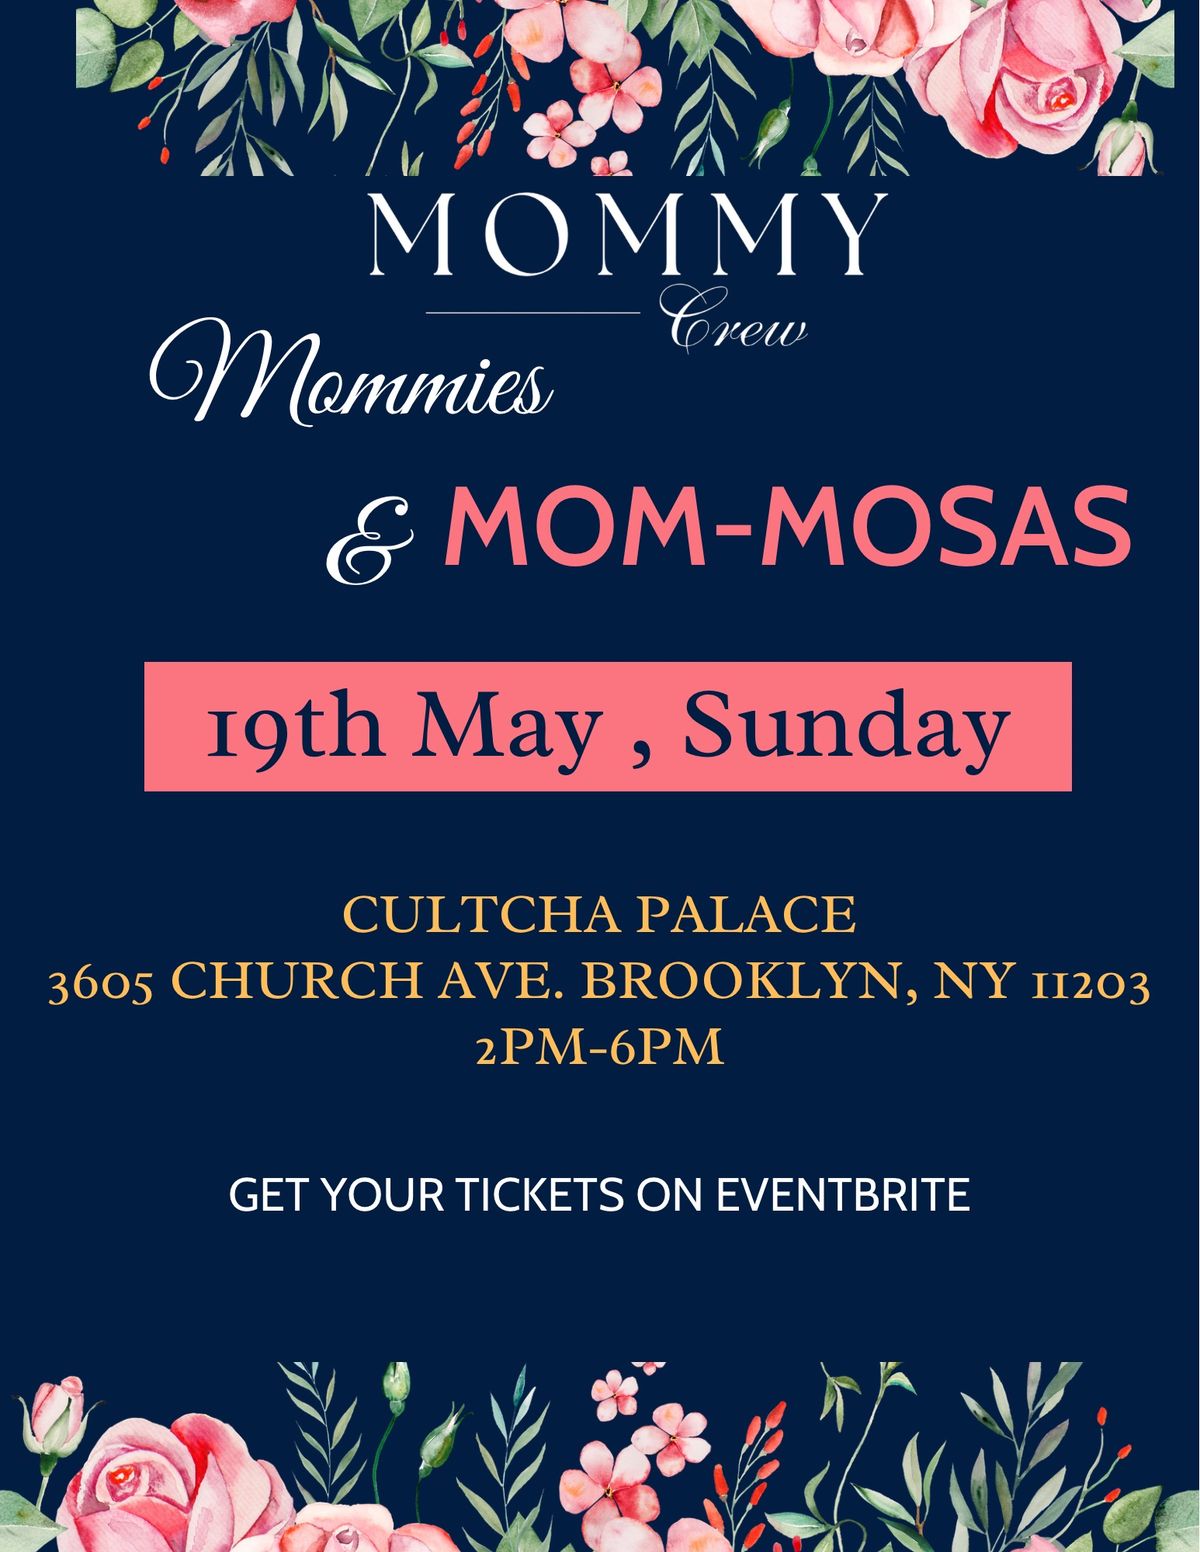 Mommies and Mom-Mosas